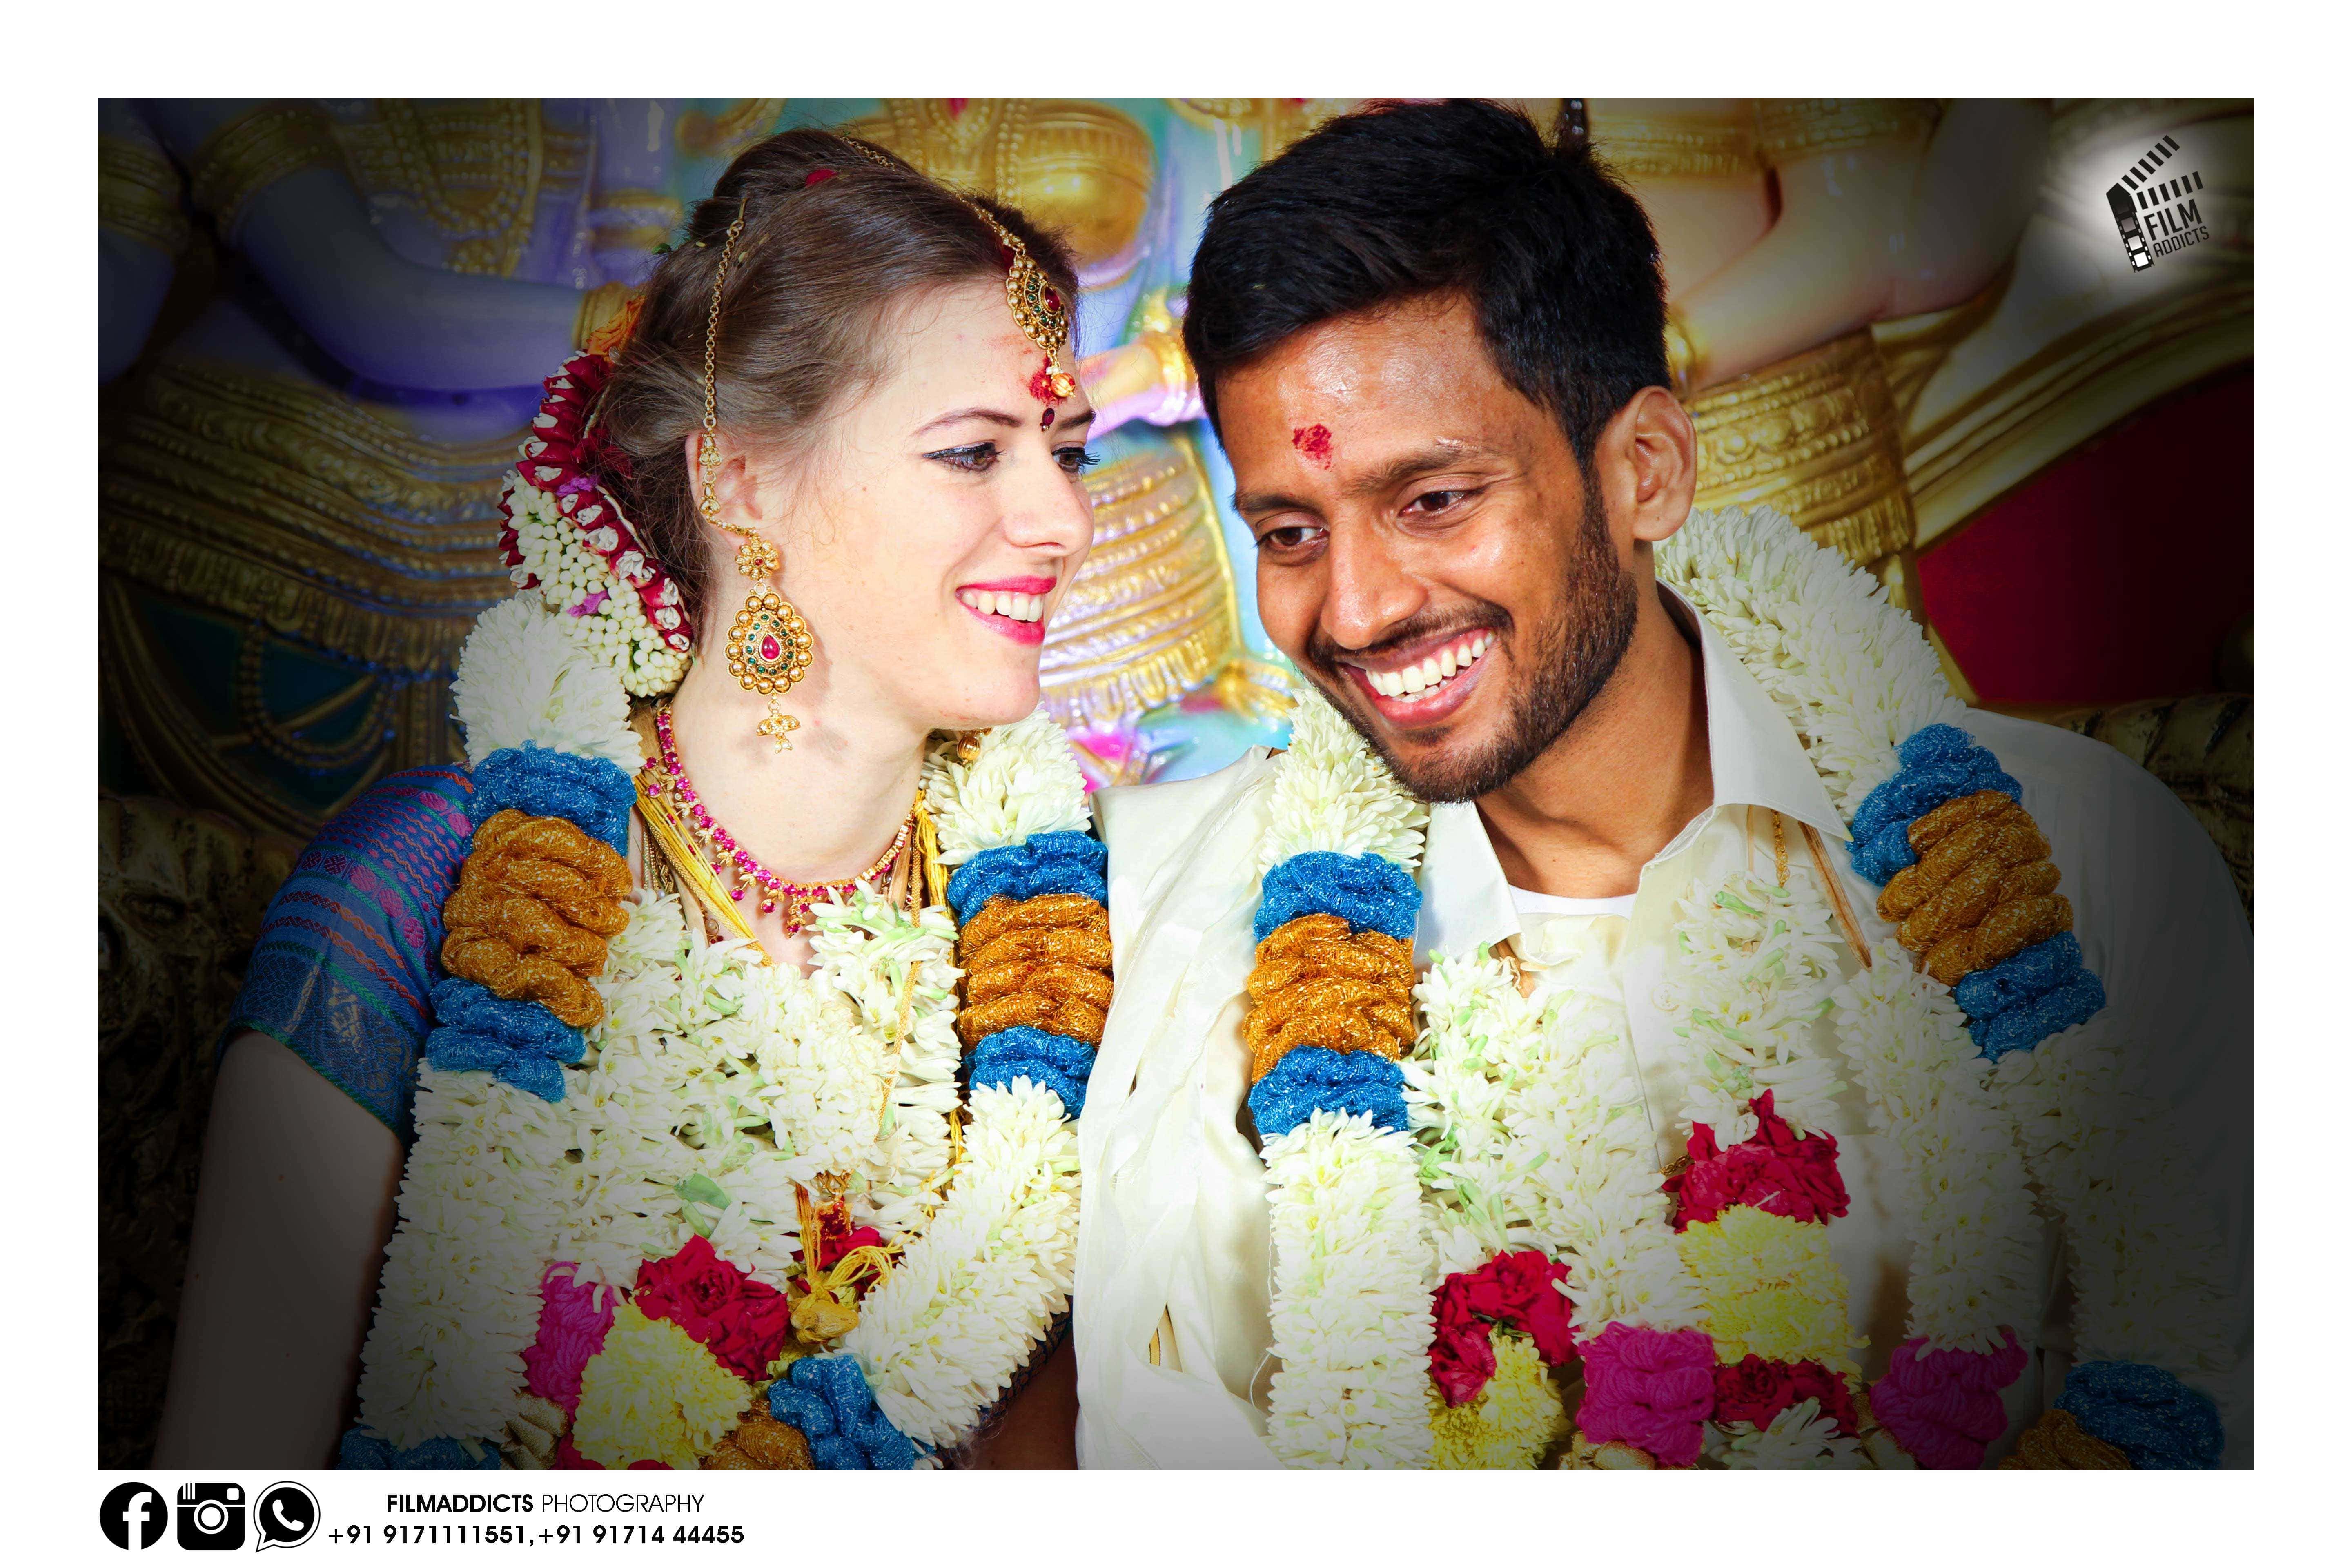 Best Photographers in Srirangam,Best Photographers in Srirangam,Best Wedding Photography in Tiruchirappalli,Best candid photography in Trichy,Best Photographers in Srirangam,Best marriage photography in Trichy,Best Photographers in Srirangam,Best photography in Trichy,Best wedding candid photography in Trichy,Best wedding candid photographers in Trichy,Best wedding video in Trichy,Best wedding videographers in Trichy,Best Photographers in Srirangam,Best candid videographers in Trichy,Best Photographers in Srirangam,Best marriage videographers in Trichy,Best marriage videography in Trichy,Best videographers in Trichy,Best videography in Trichy,Best wedding candid videography in Trichy,Best wedding candid videographers in Trichy,Best helicam operators in Trichy,Best drone operators in Trichy,Best wedding studio in Trichy,Best professional photographers in Trichy,Best professional photography in Trichy,No.1 wedding photographers in Trichy,No.1 wedding photography in Trichy,Trichy wedding photographers,Trichy wedding photography,Trichy wedding videos,Best candid videos in Trichy,Best candid photos in Trichy,Best helicam operators photography in Trichy,Best helicam operator photographers in Trichy,Best outdoor videography in Trichy,Best professional wedding photography in Trichy,Best outdoor photography in Trichy,Best outdoor photographers in Trichy,Best drone operators photographers in Trichy,Best wedding candid videography in Trichy,tamilnadu wedding photography, tamilnadu.